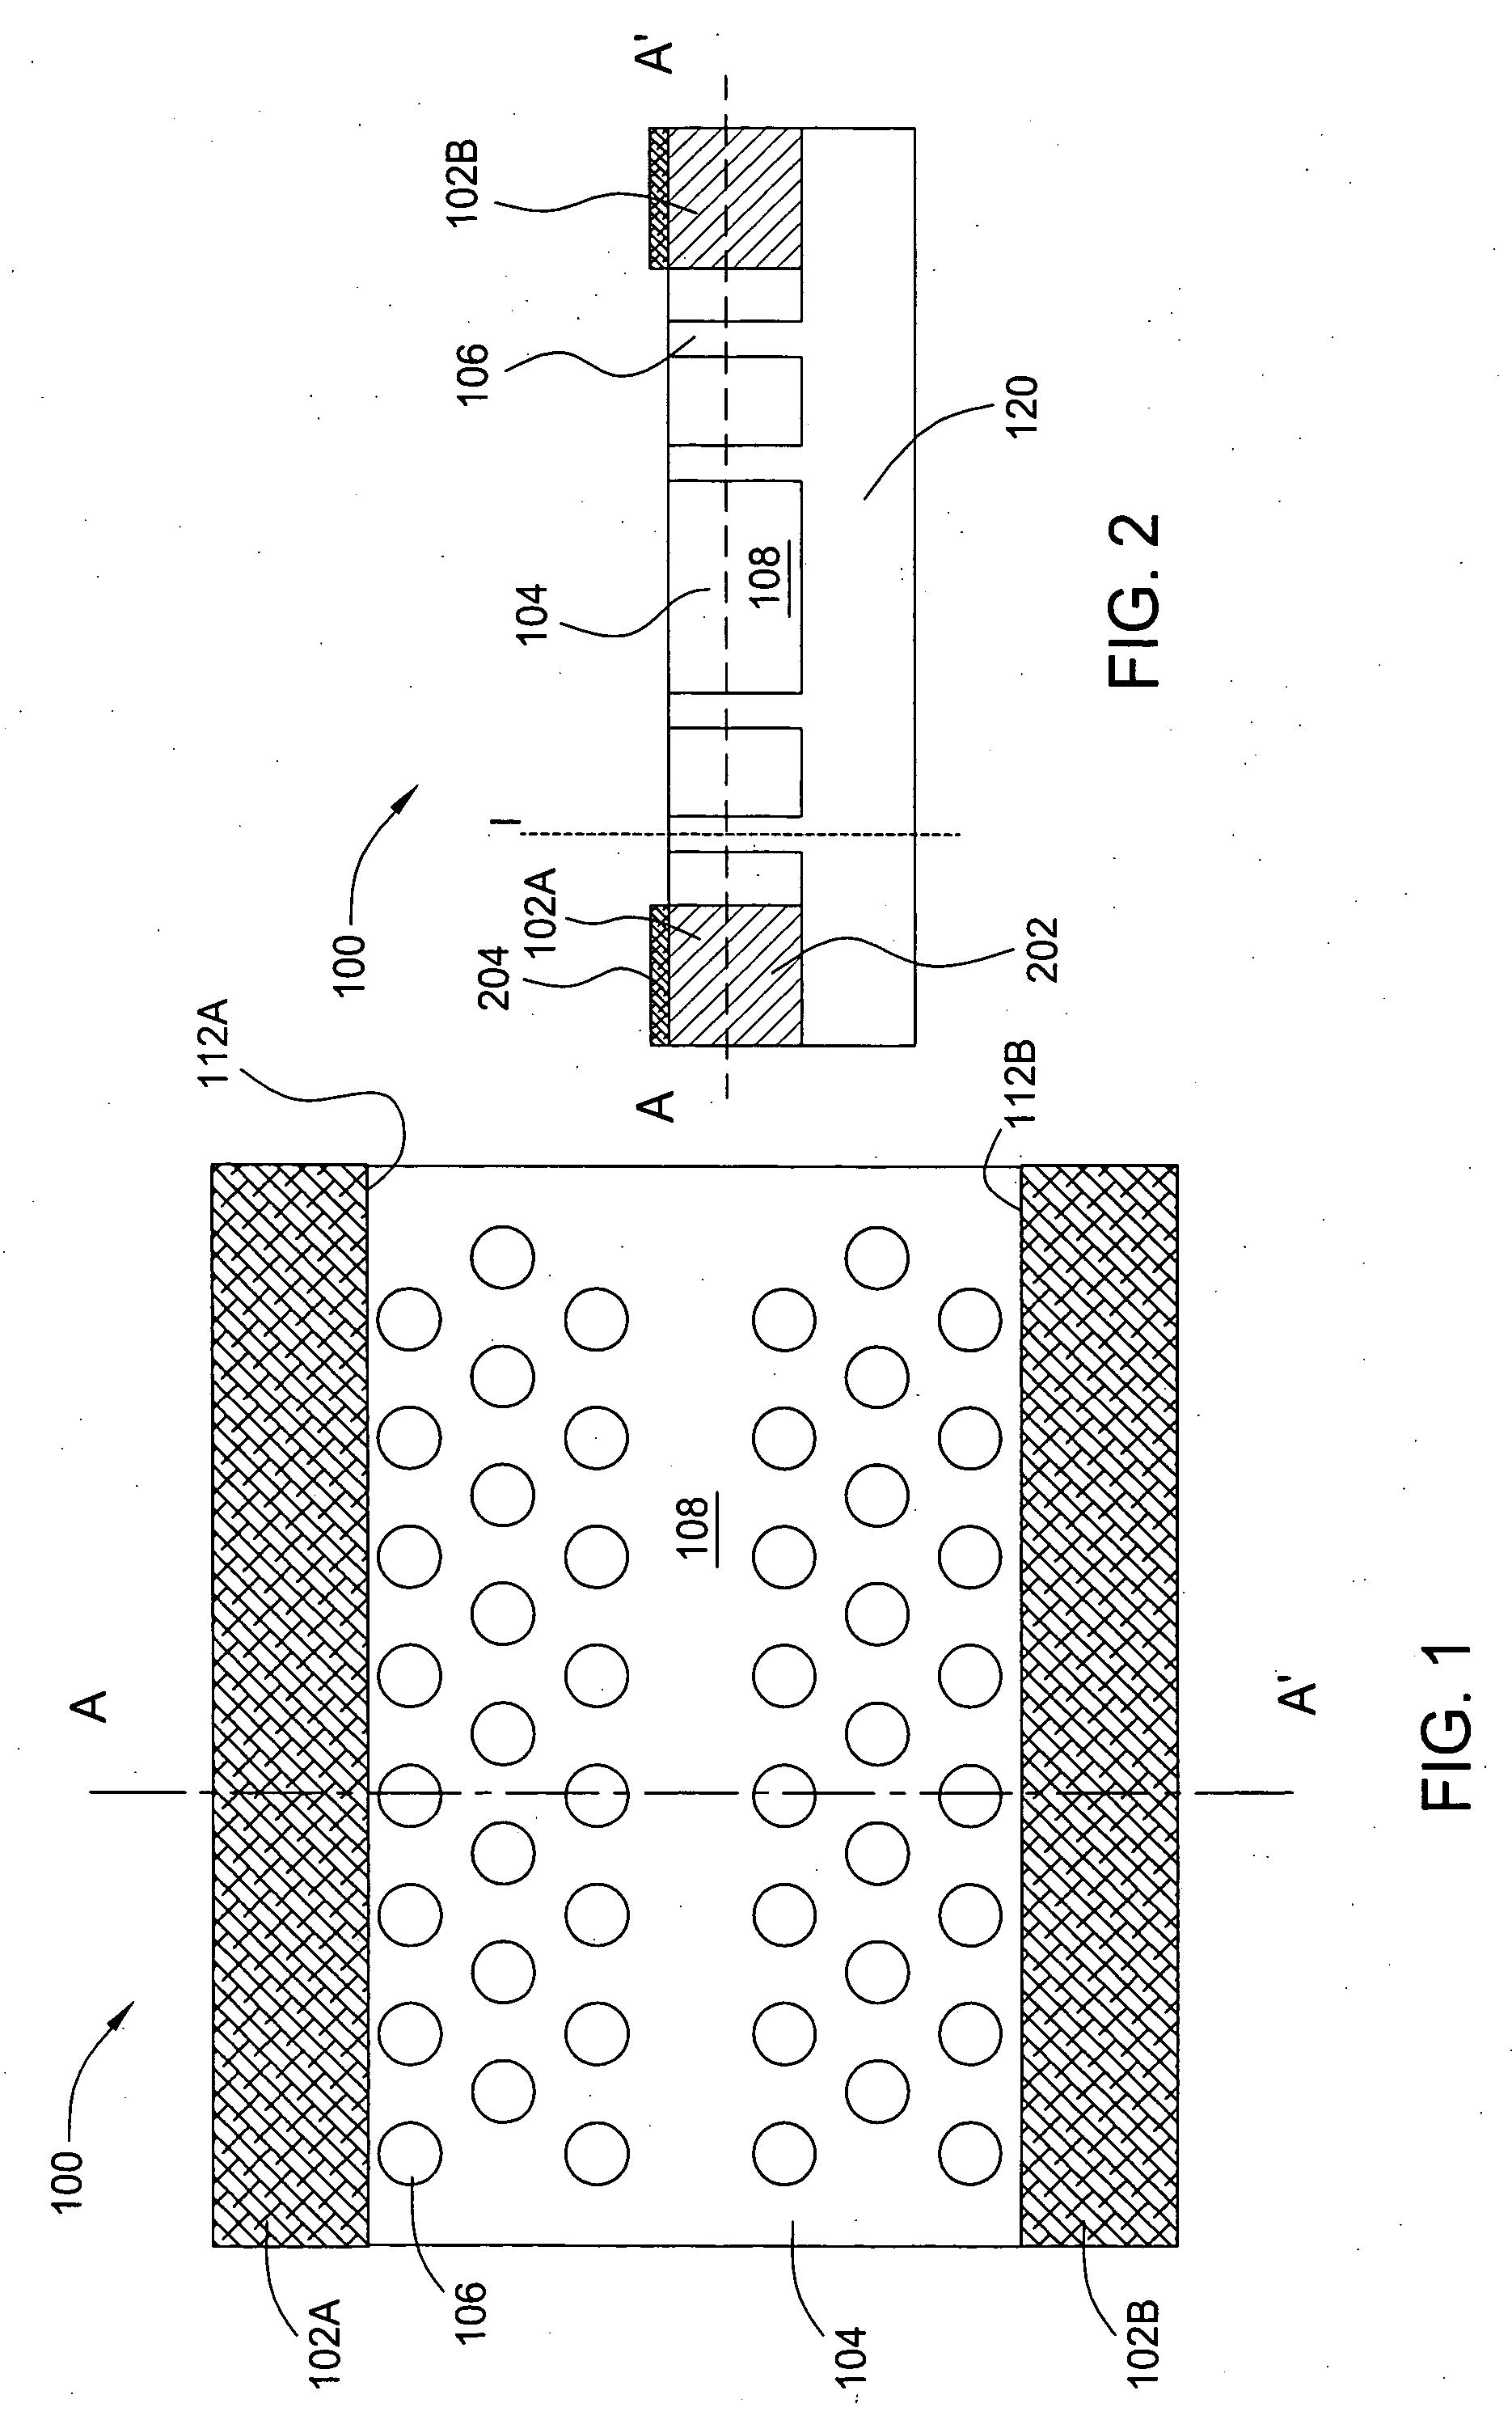 Method and apparatus for thermo-optic modulation of optical signals